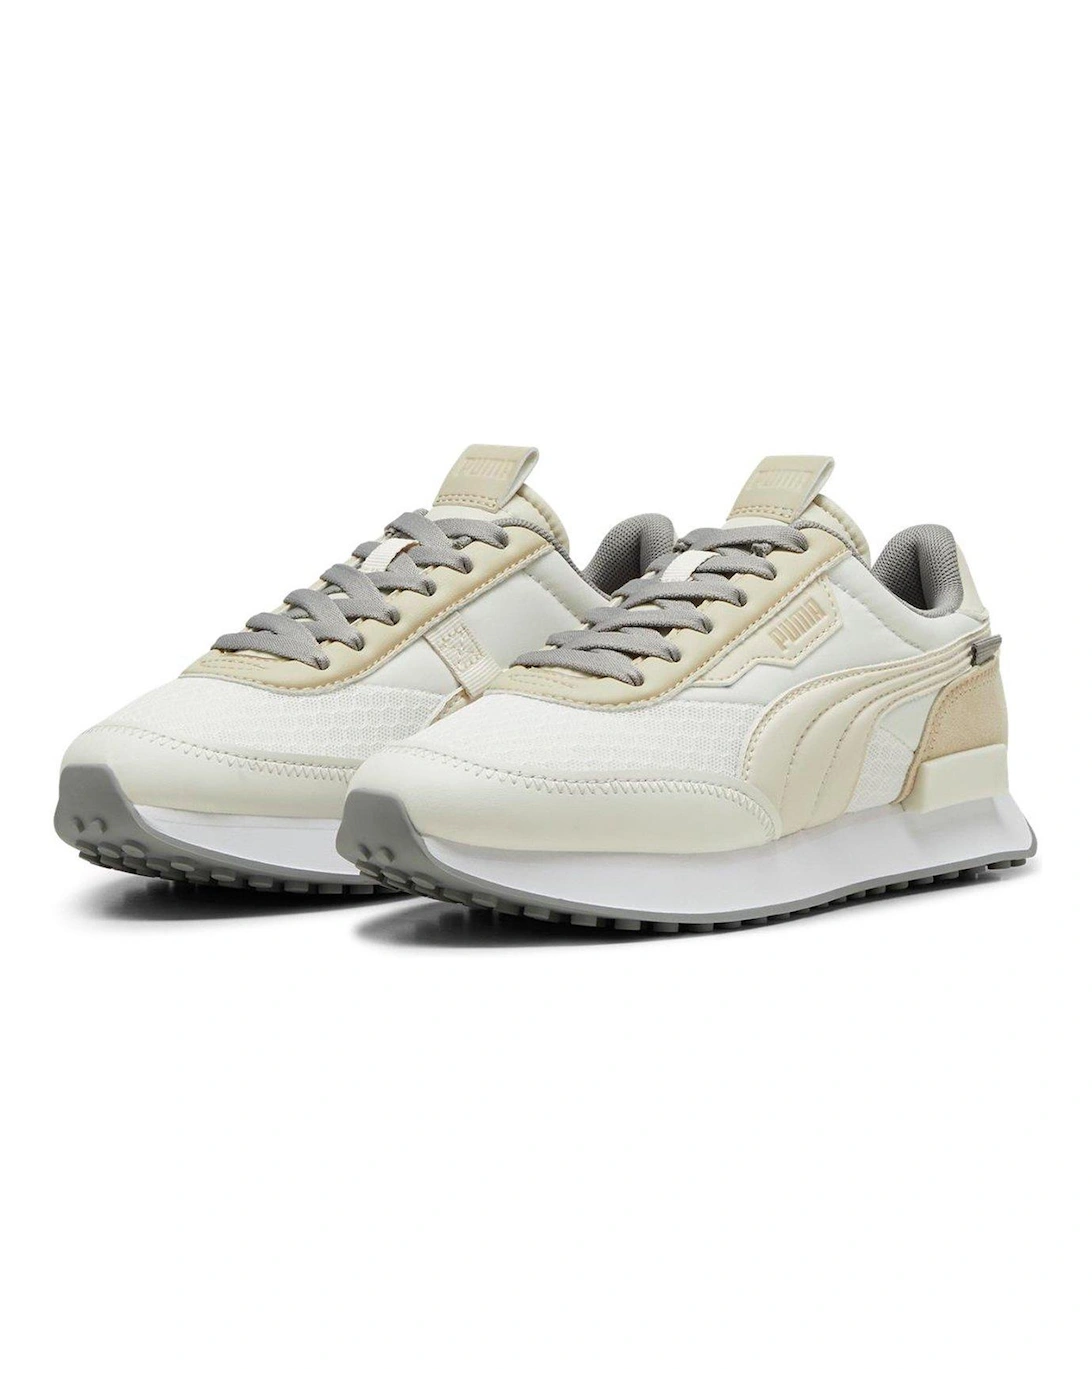 Womens Future Rider Pastel Trainers - Off White/grey